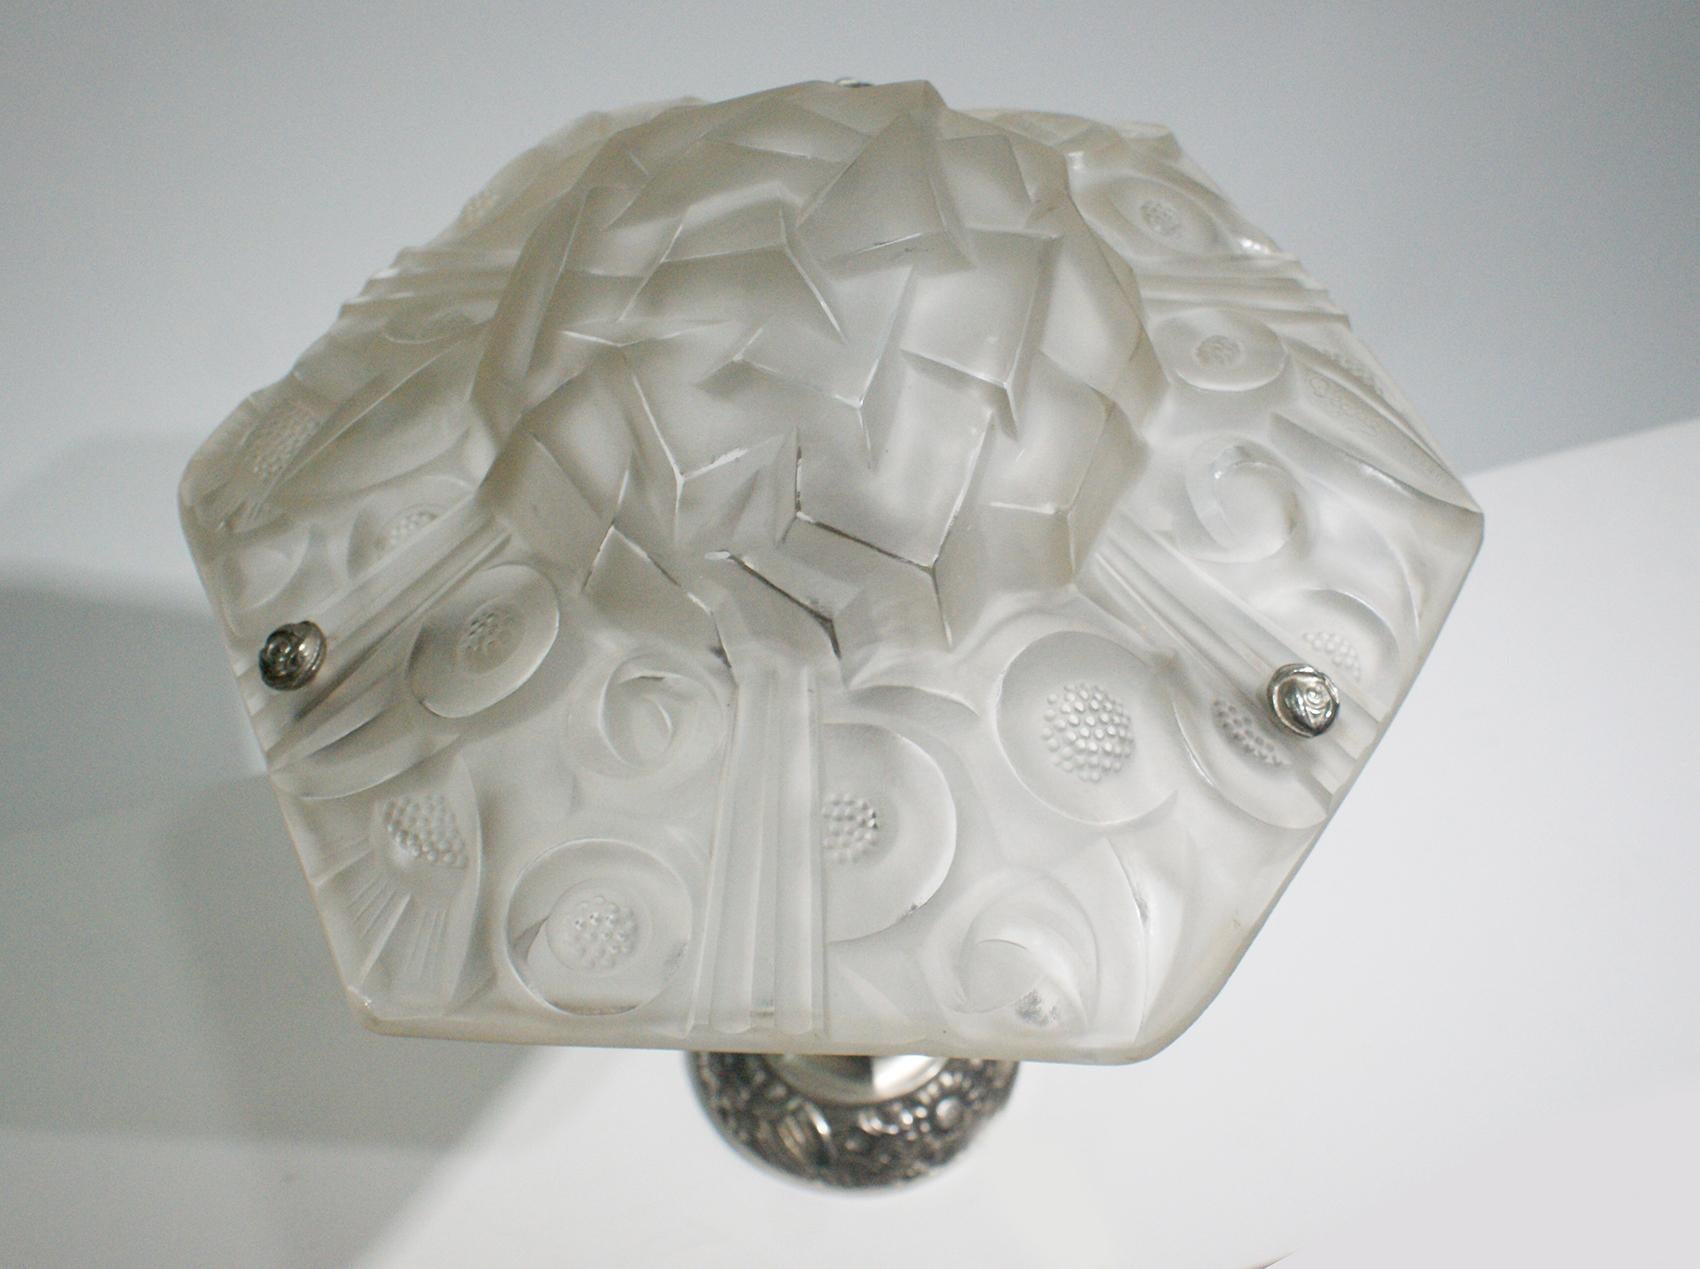 French Art Deco Floral Table Lamp Signed “Degue” In Good Condition For Sale In Beirut, LB